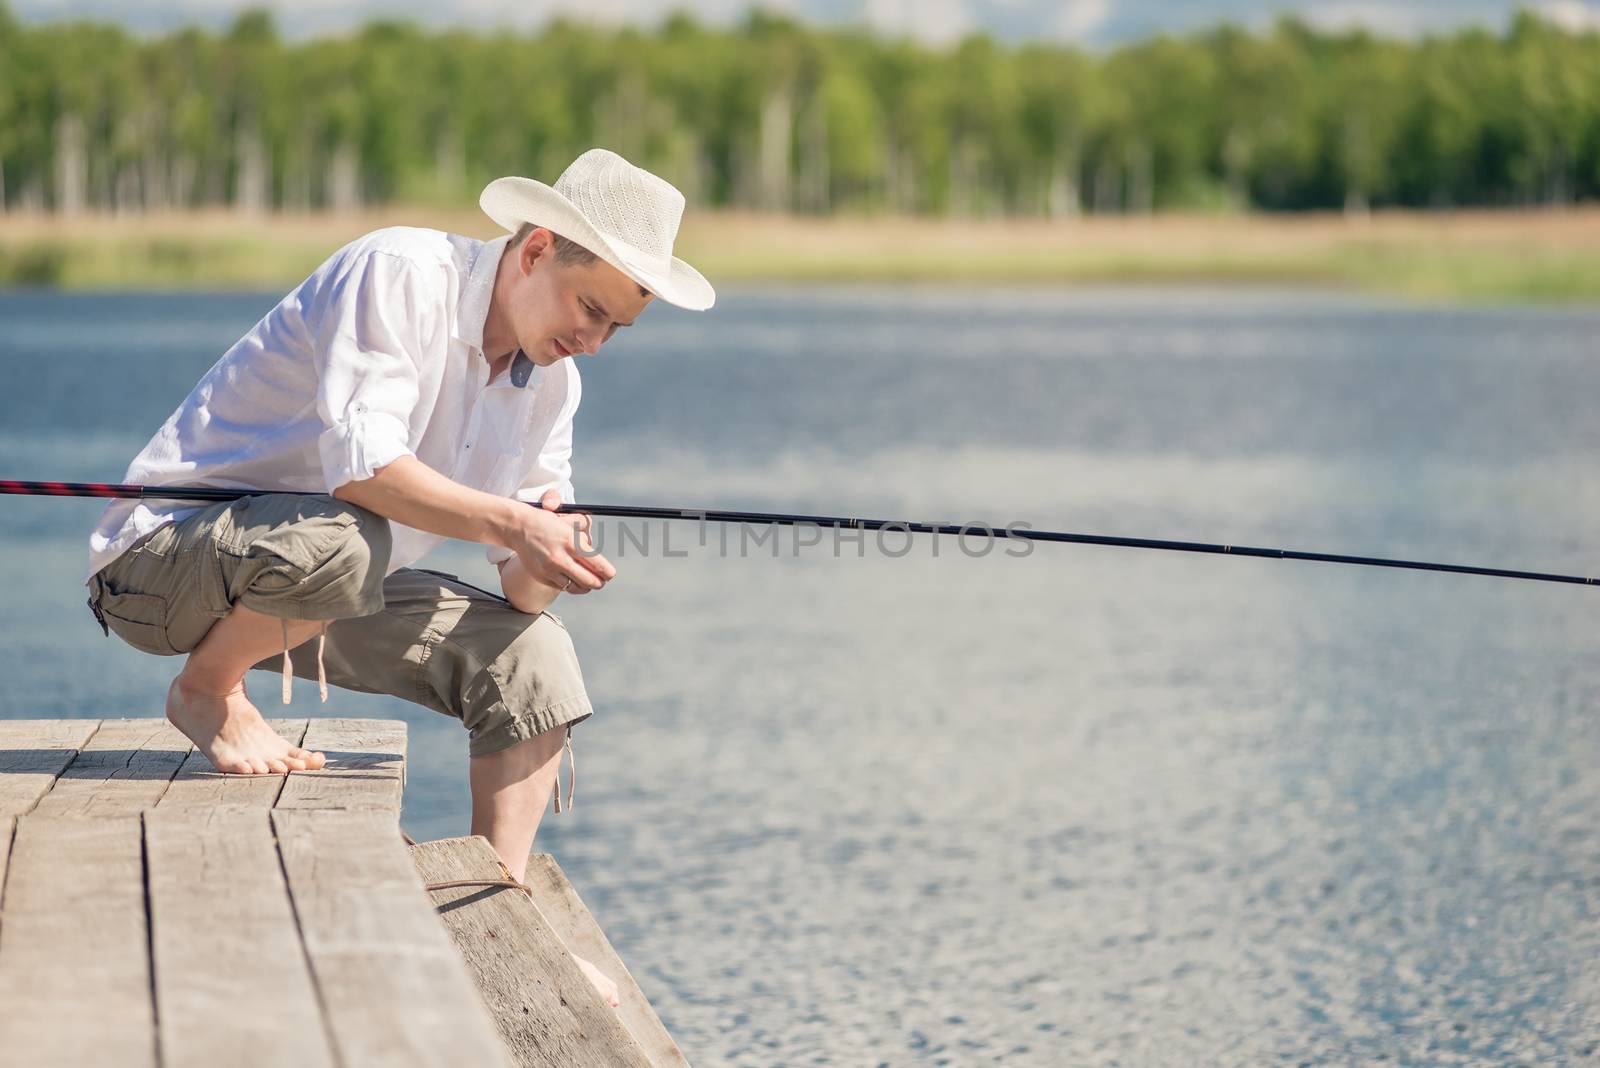 A fisherman in a hat on a wooden pier is fishing on a sunny summer day